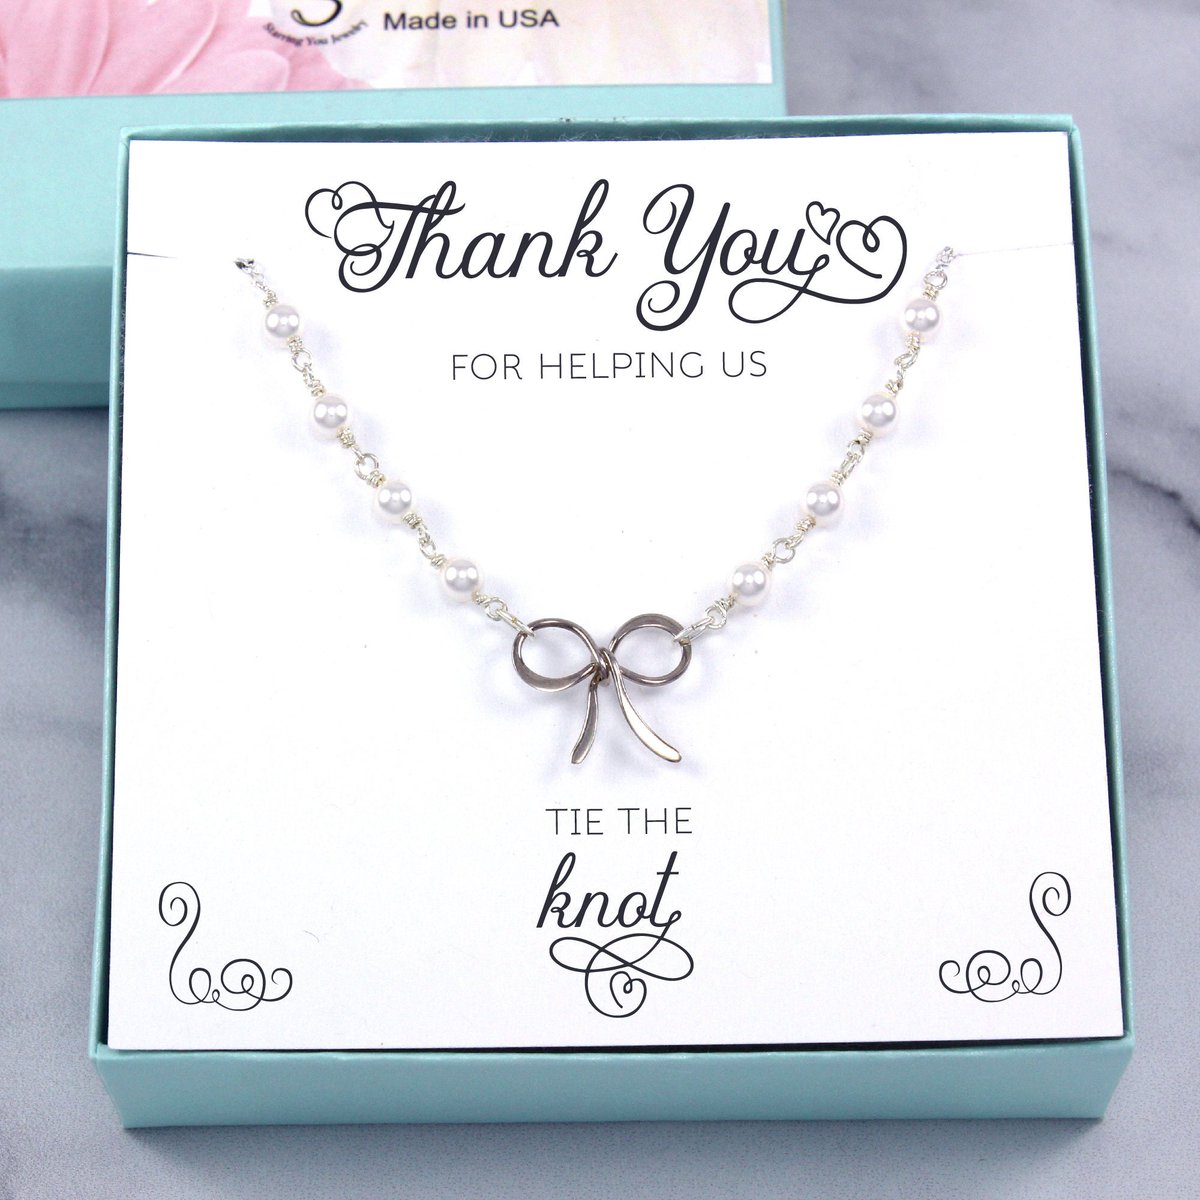 Bridesmaid Gift: Pearl Bow Necklace, sterling silver, ribbon charm, bridesmaid, maid of honor, matron of honor, thank you, handmade jewelry tuppu.net/eda85a73 #giftideas #Etsy #etsyshop #etsygifts #etsyjewelry #etsyfinds #etsyseller